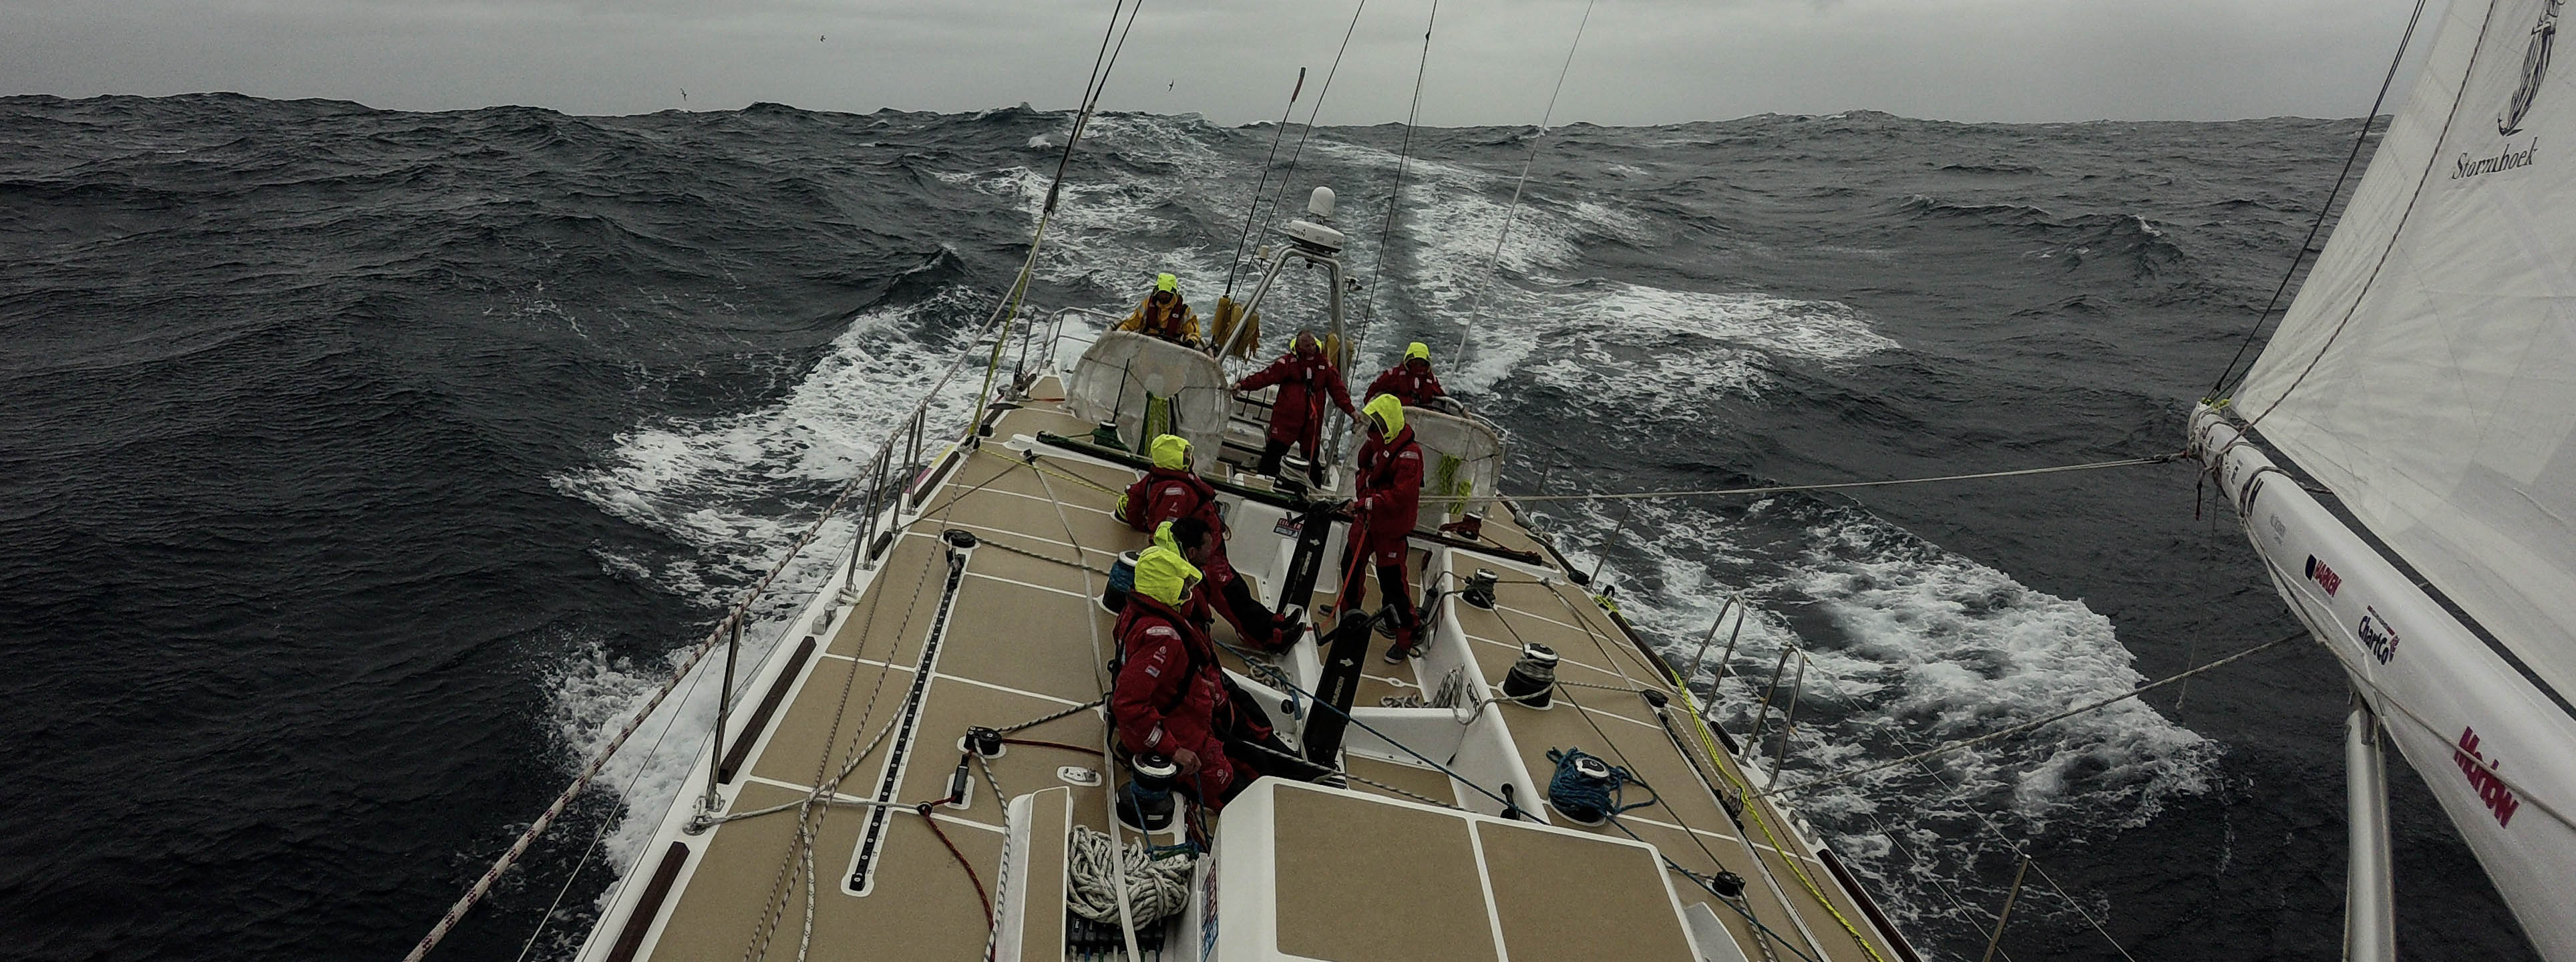 ​Race 2 Day 16: Wind shifts keep remaining teams focused on finish